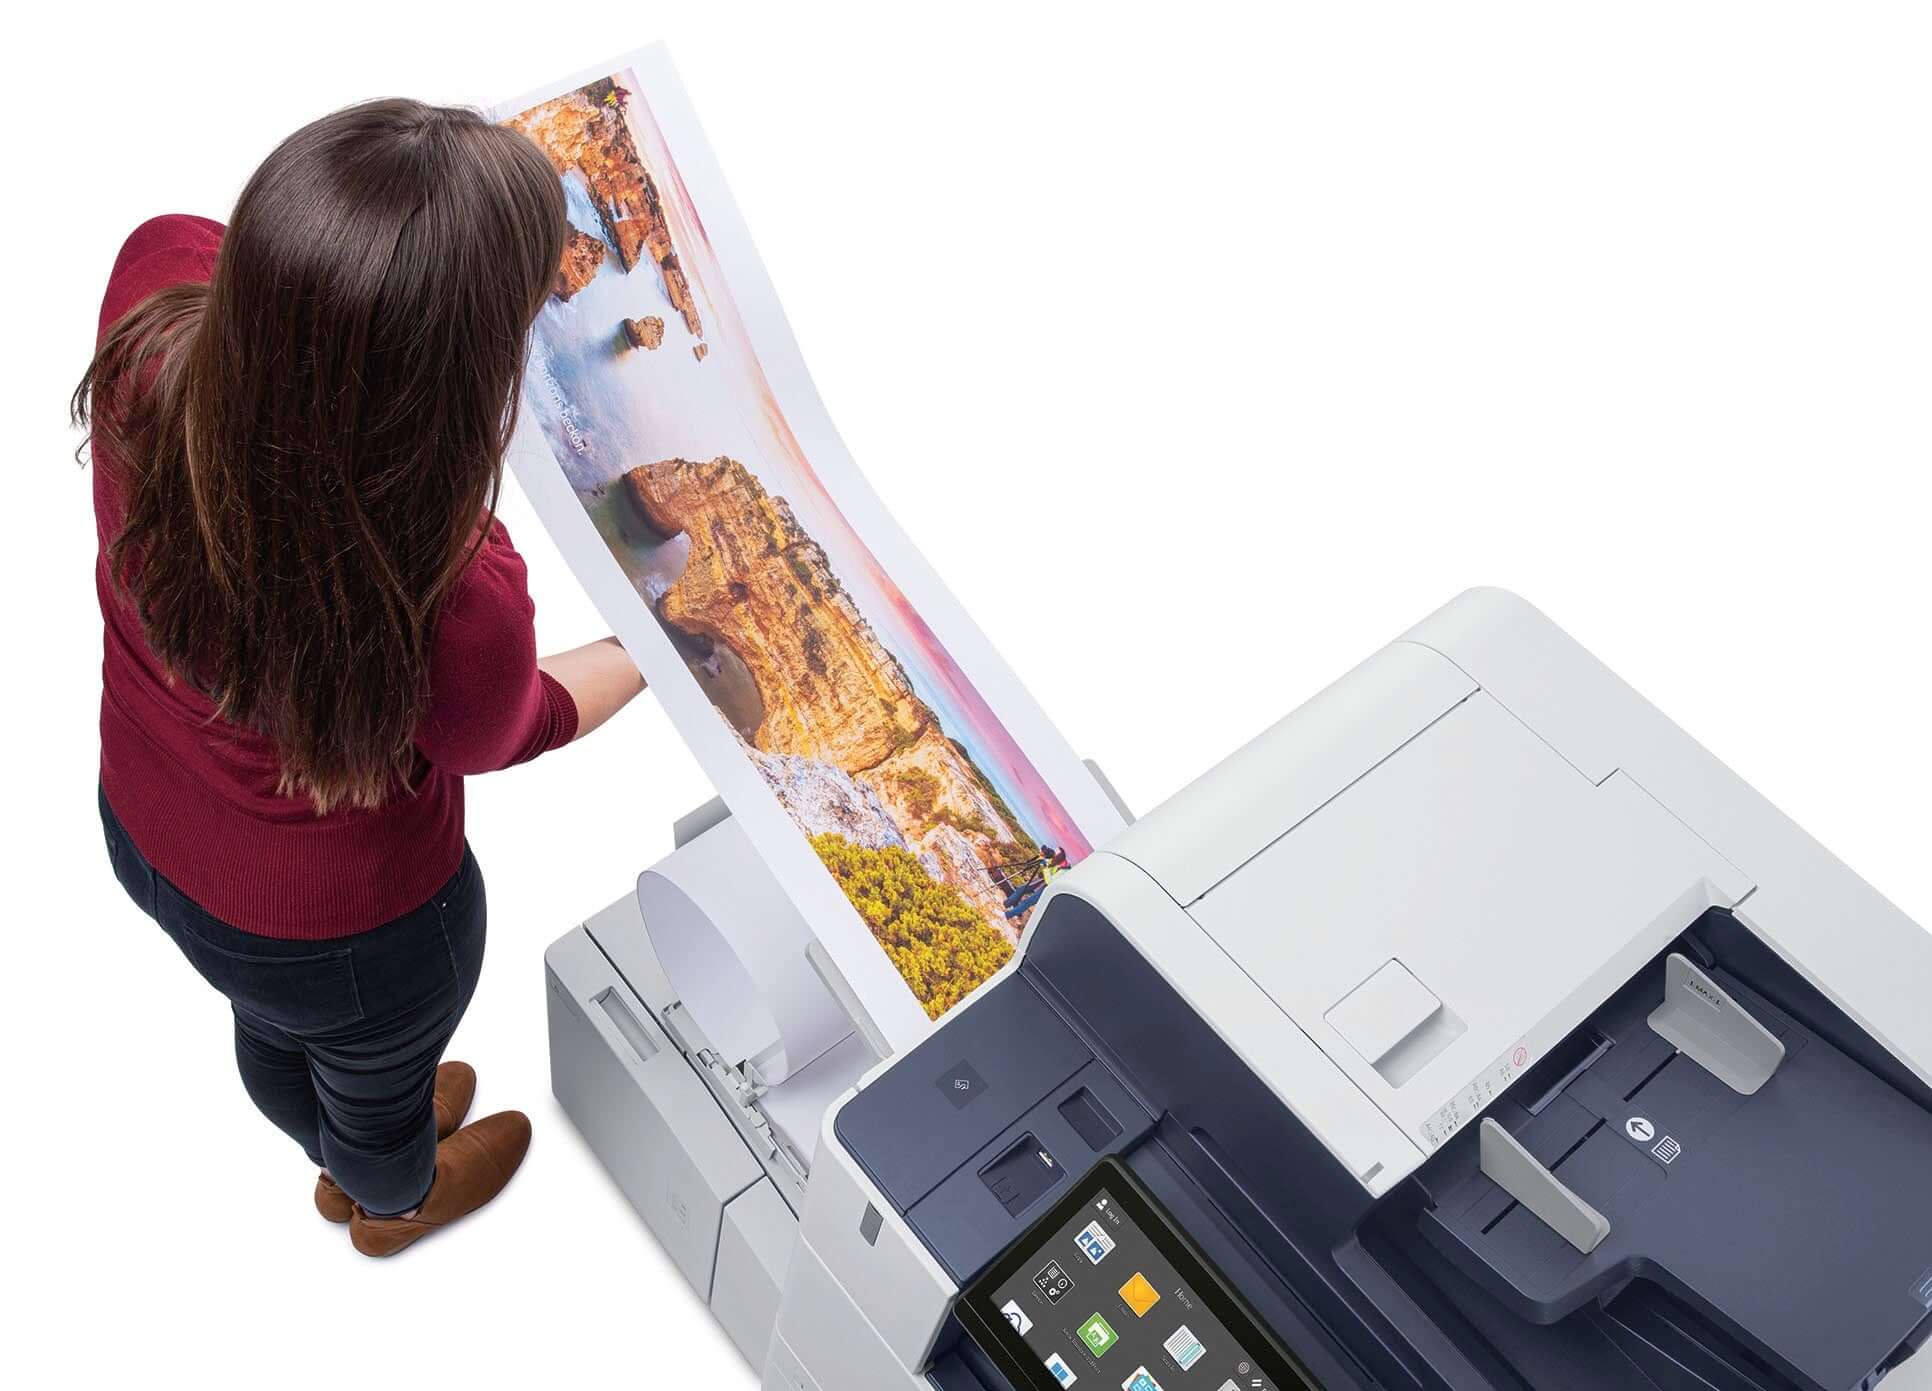 Xerox AltaLink C8145 A3 Colour Multi-Function Printer - 3,140 Paper Supply